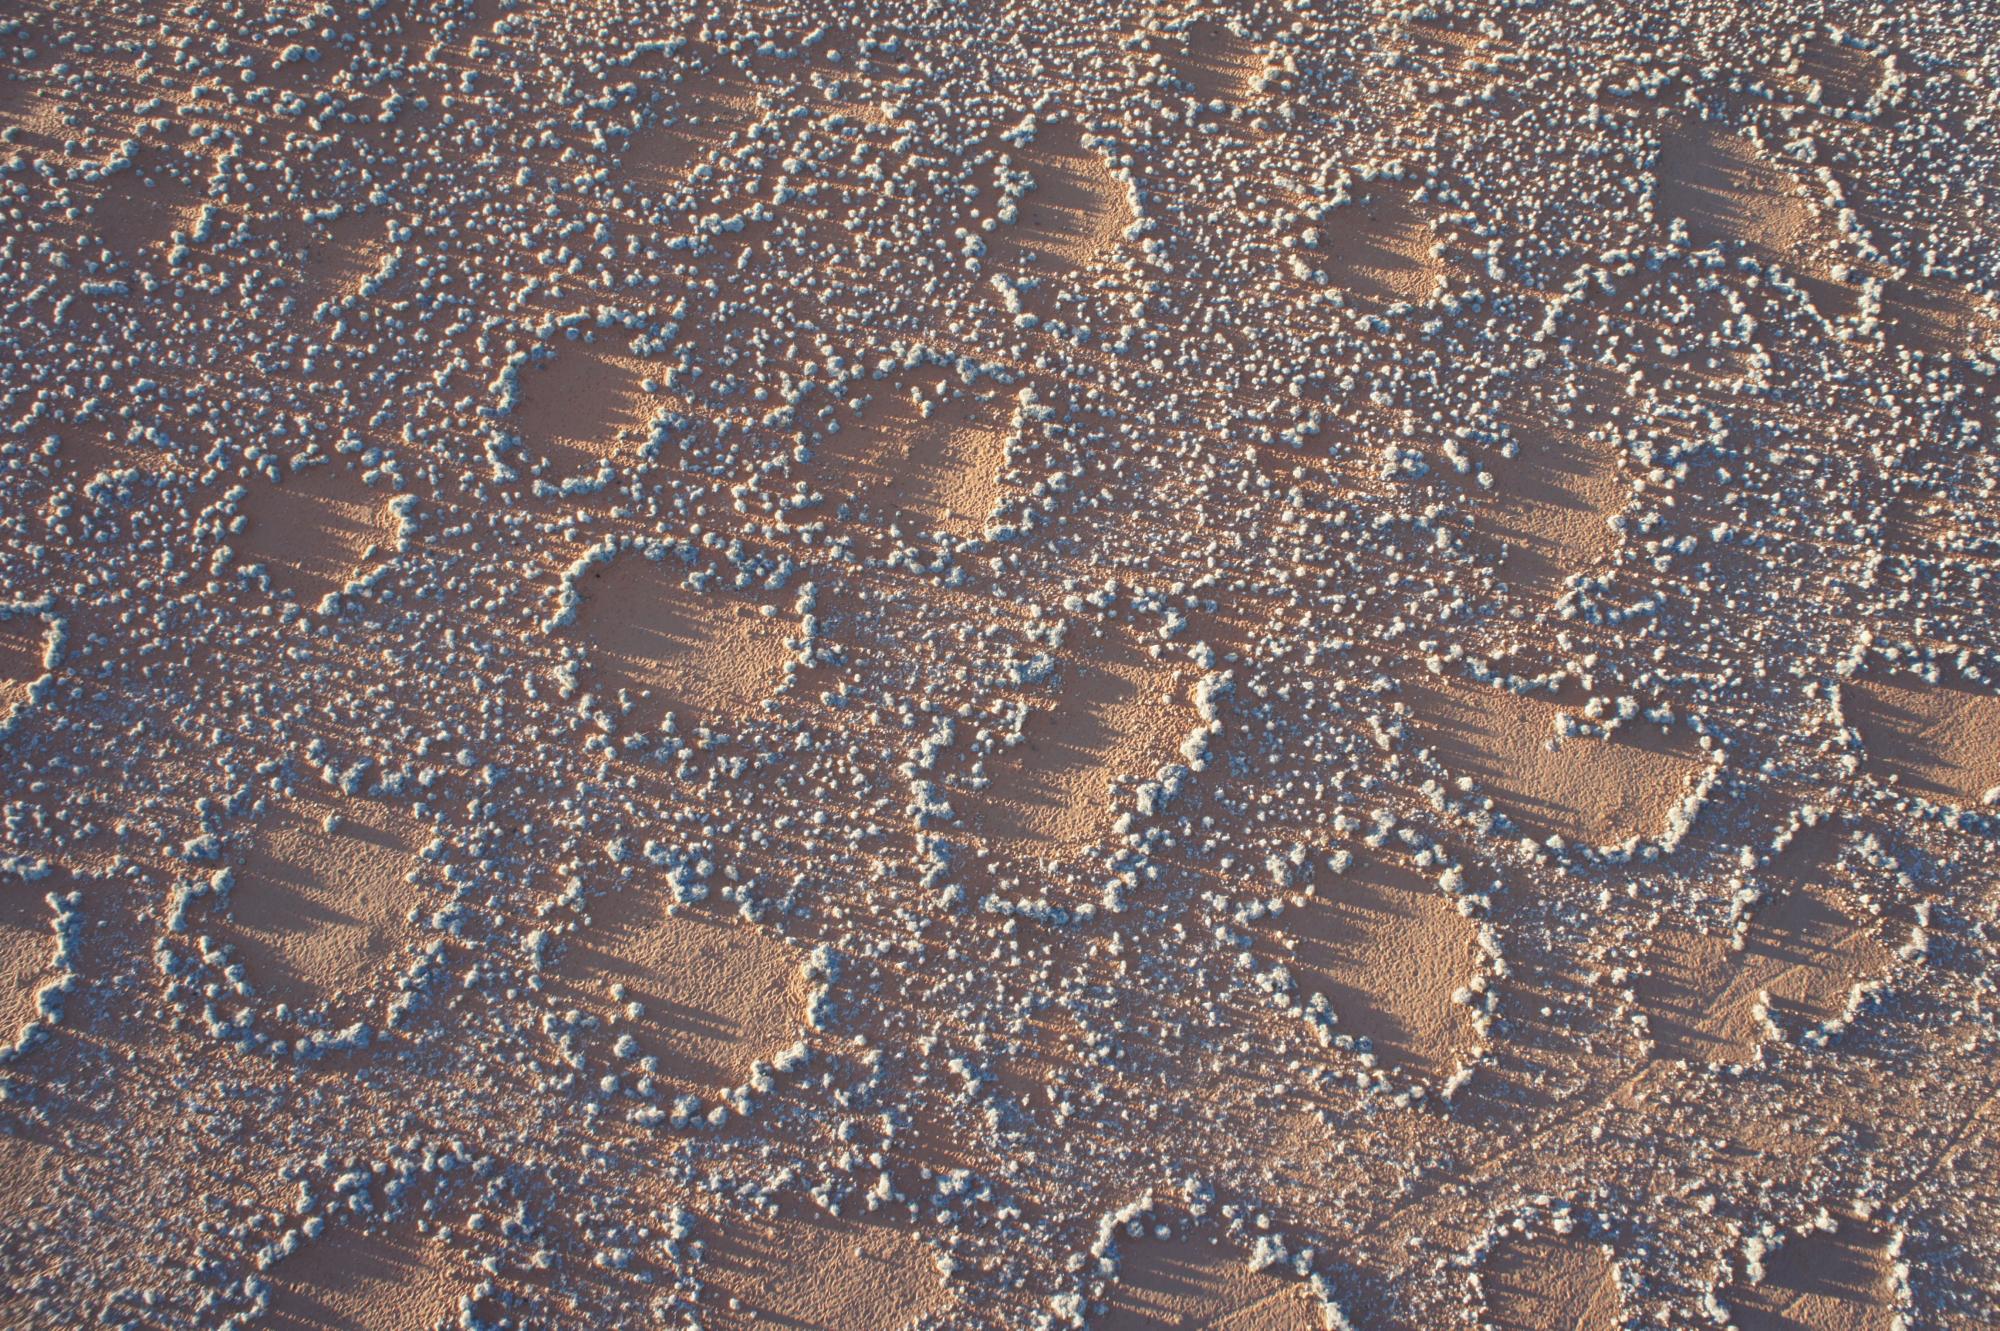 A Mystery Circling the Desert, Fairy Circles in Namibia